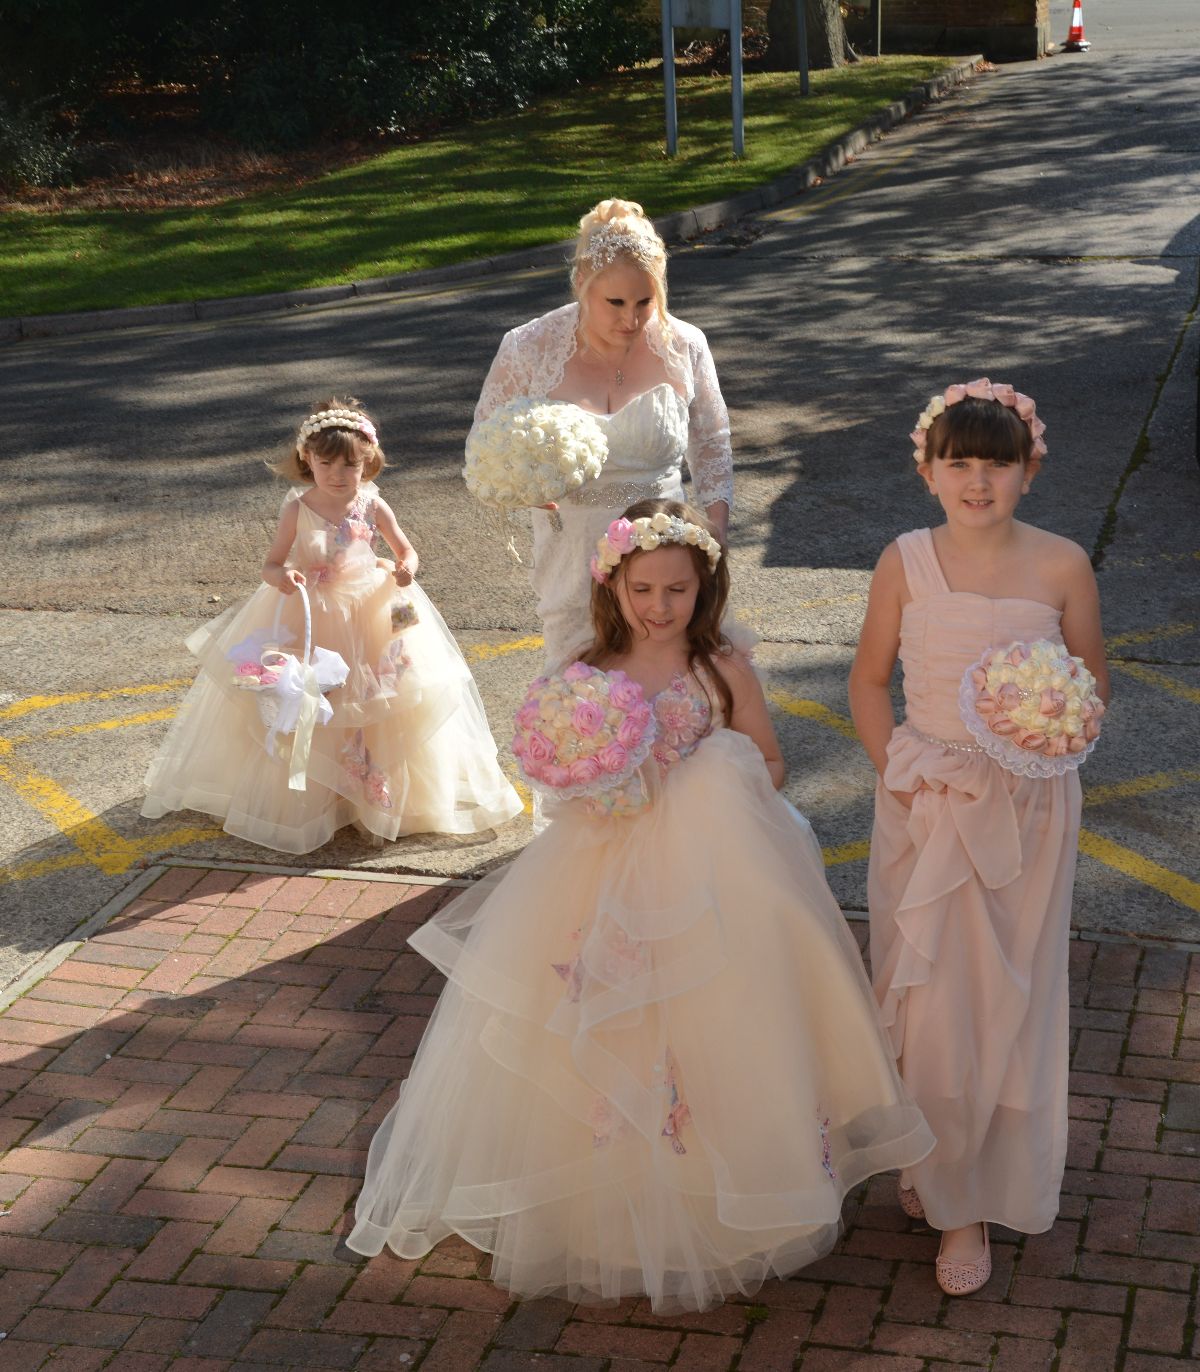 The bride and bridesmaids...